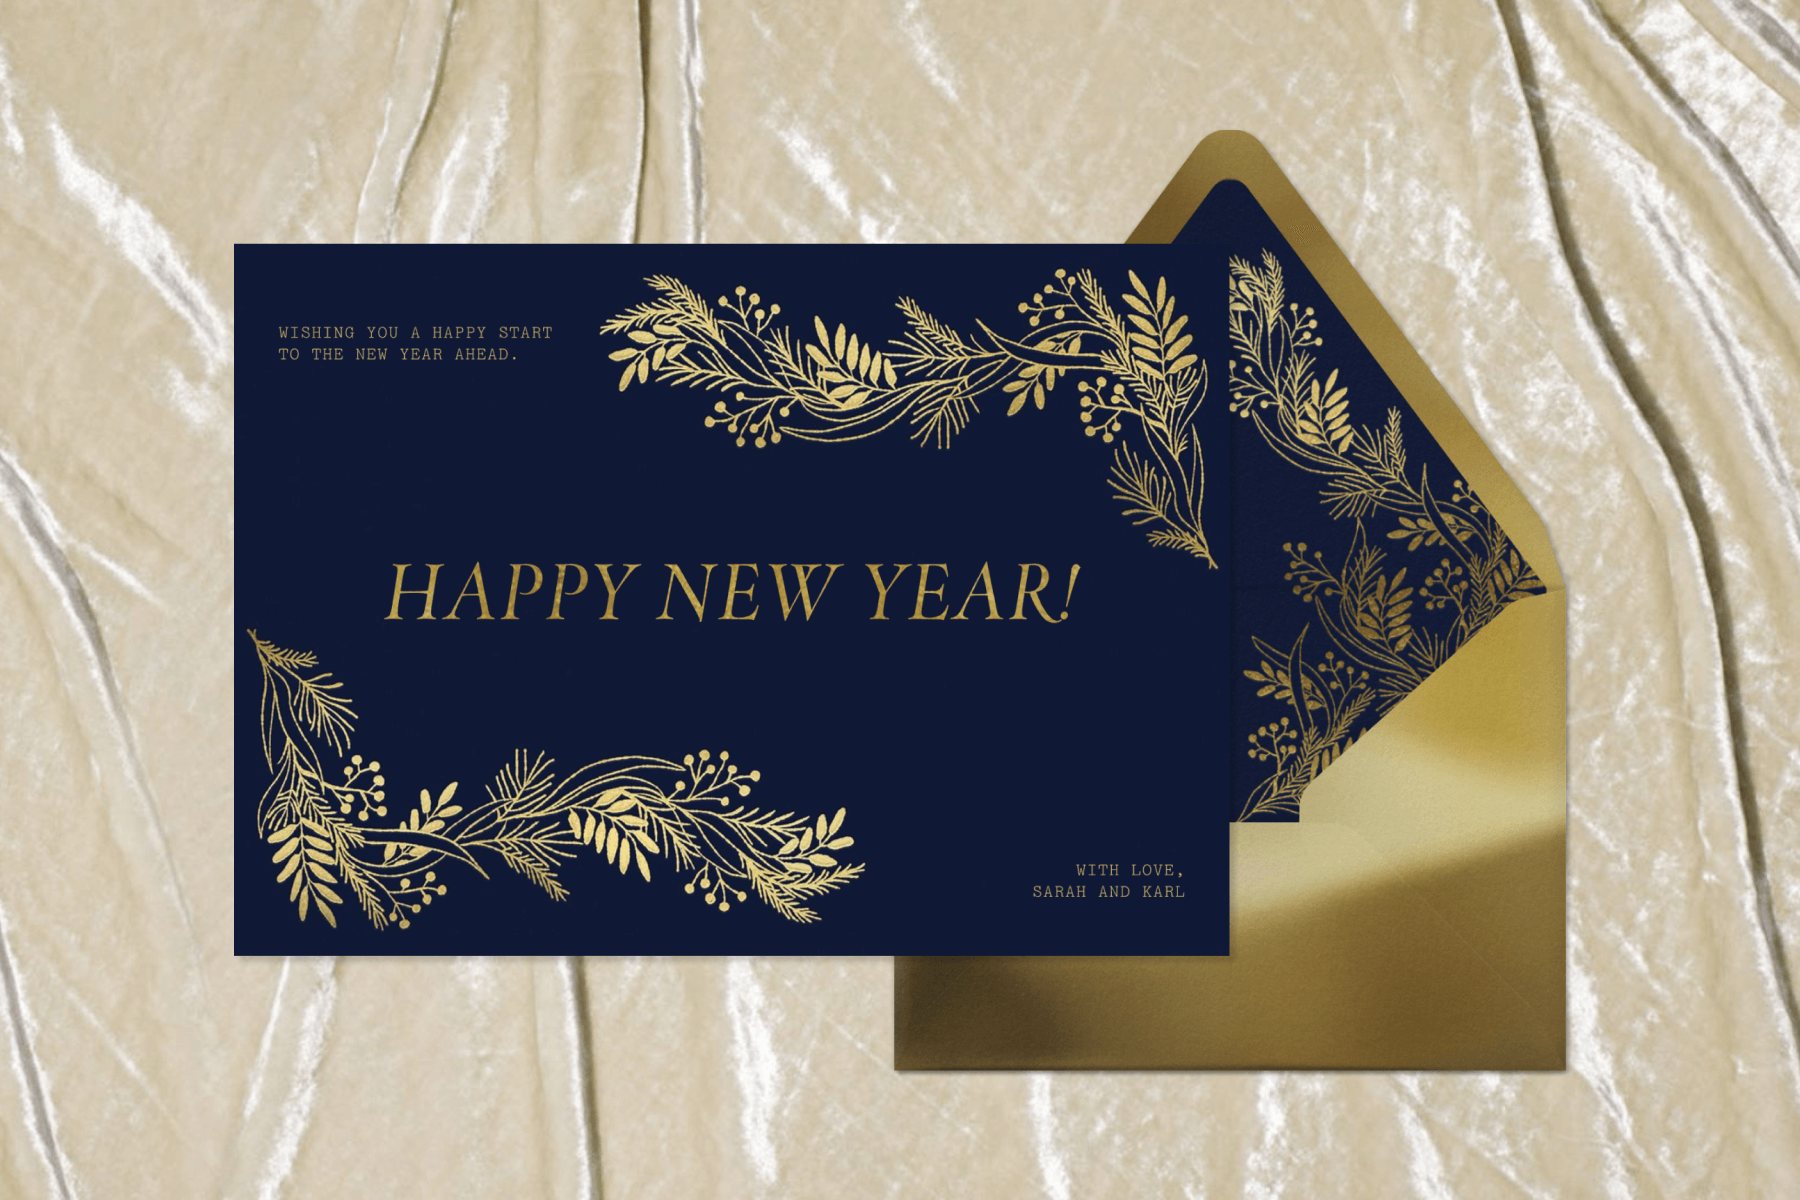 A navy blue New Year card with golden floral motifs and the words "Happy New Year!"